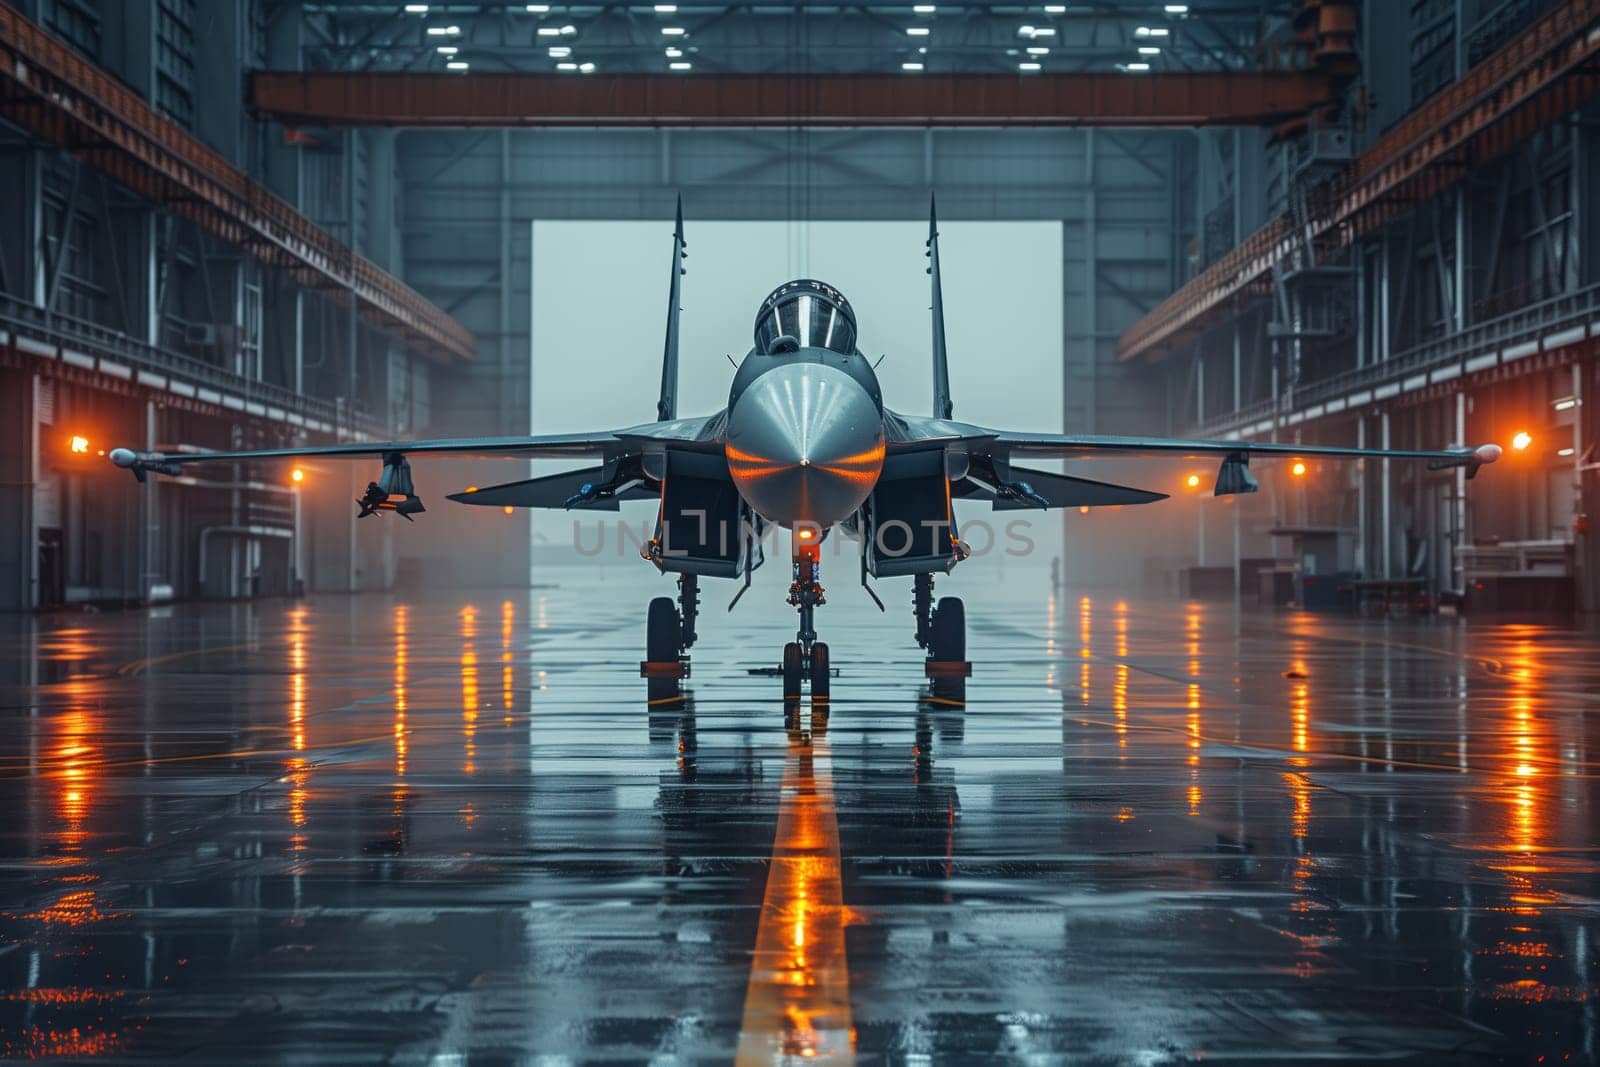 A Fighter aircraft is stored in an Aerospace hangar by richwolf